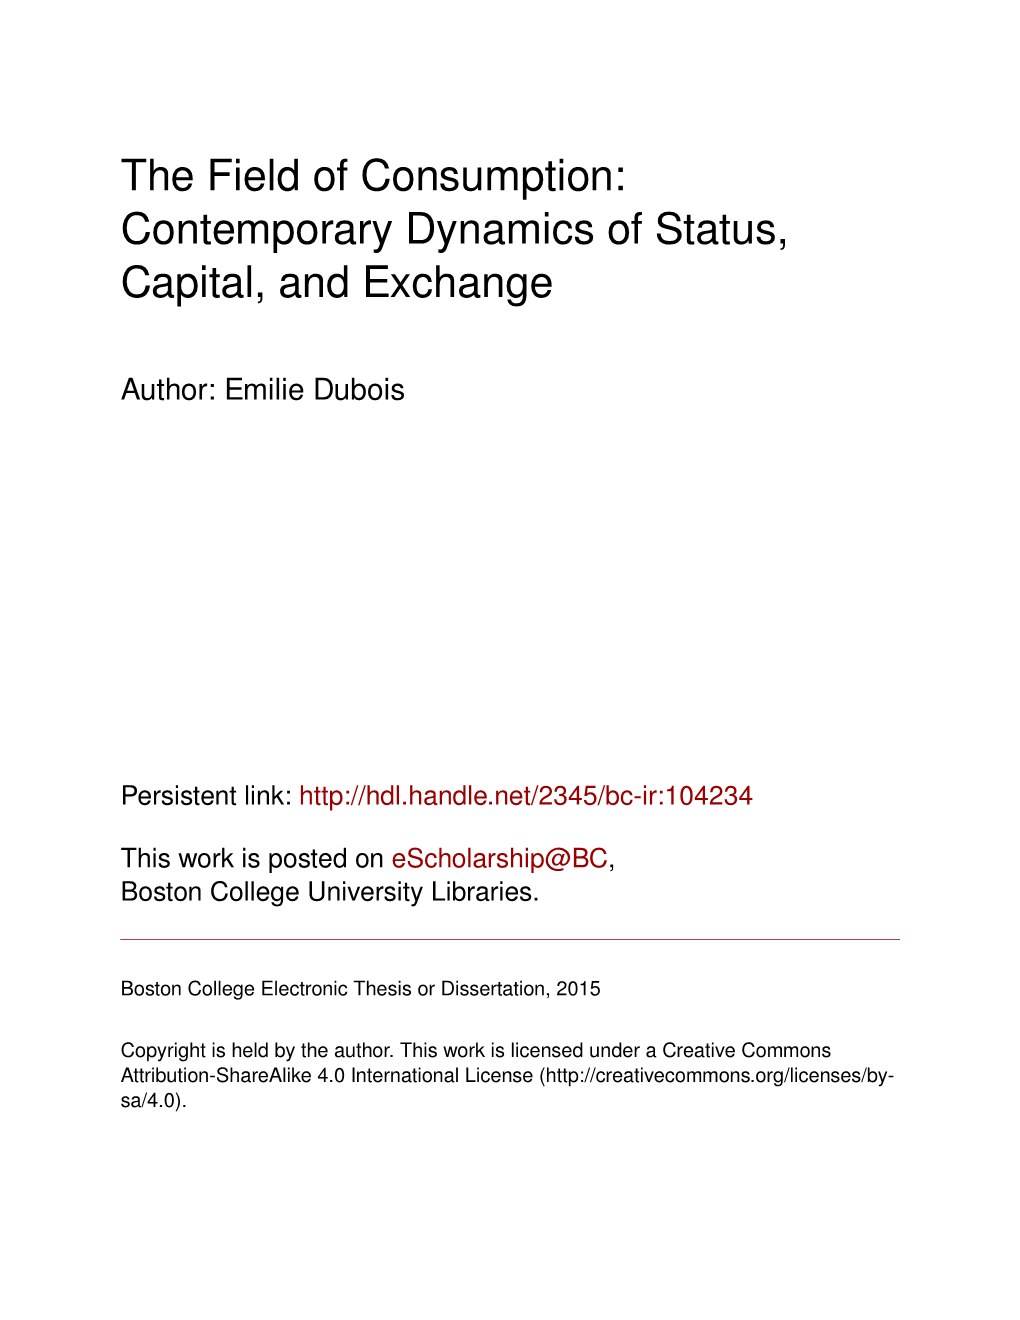 The Field of Consumption: Contemporary Dynamics of Status, Capital, and Exchange